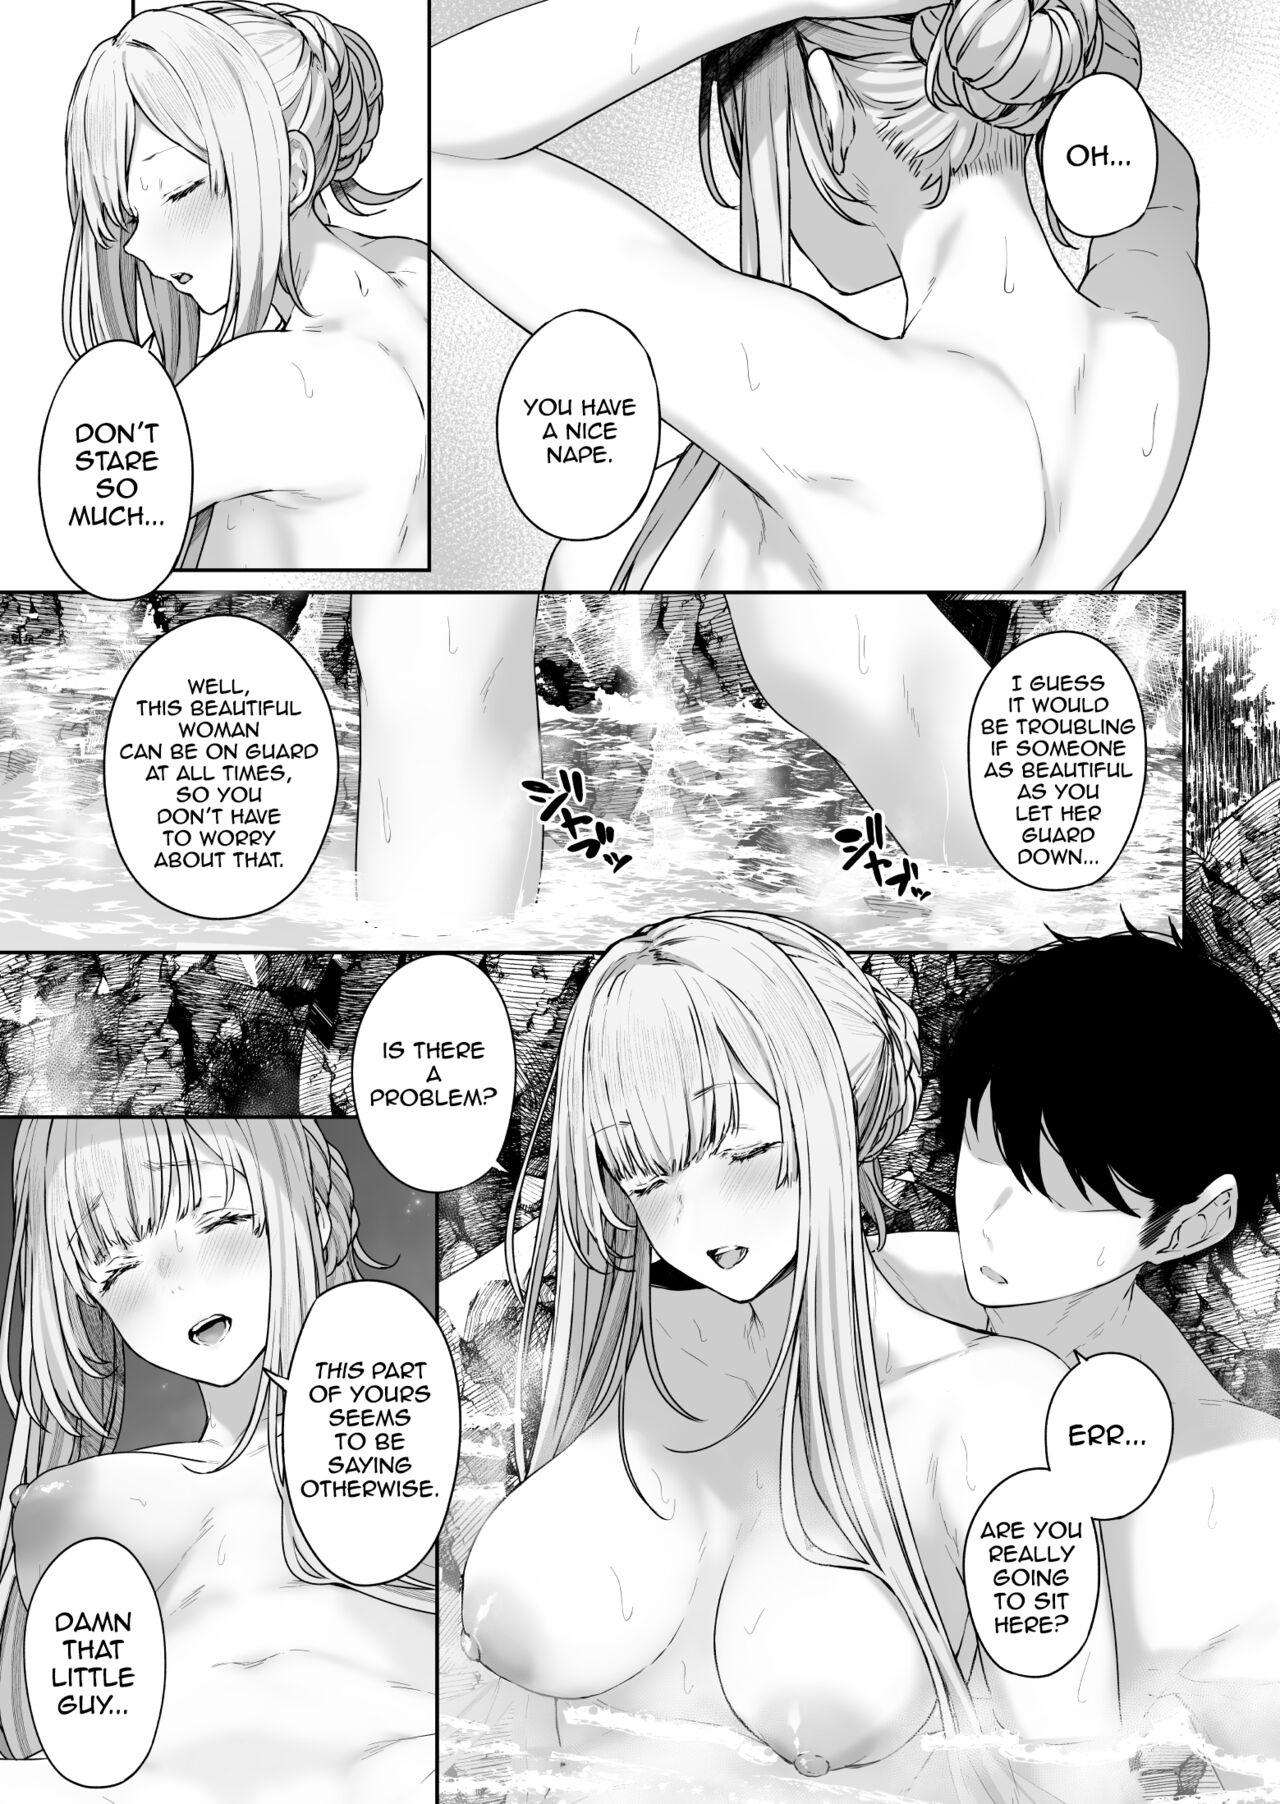 Muscles Hangyaku Onsen 2 | Hot Springs DEFY 2 - Girls frontline Cum On Tits - Page 12